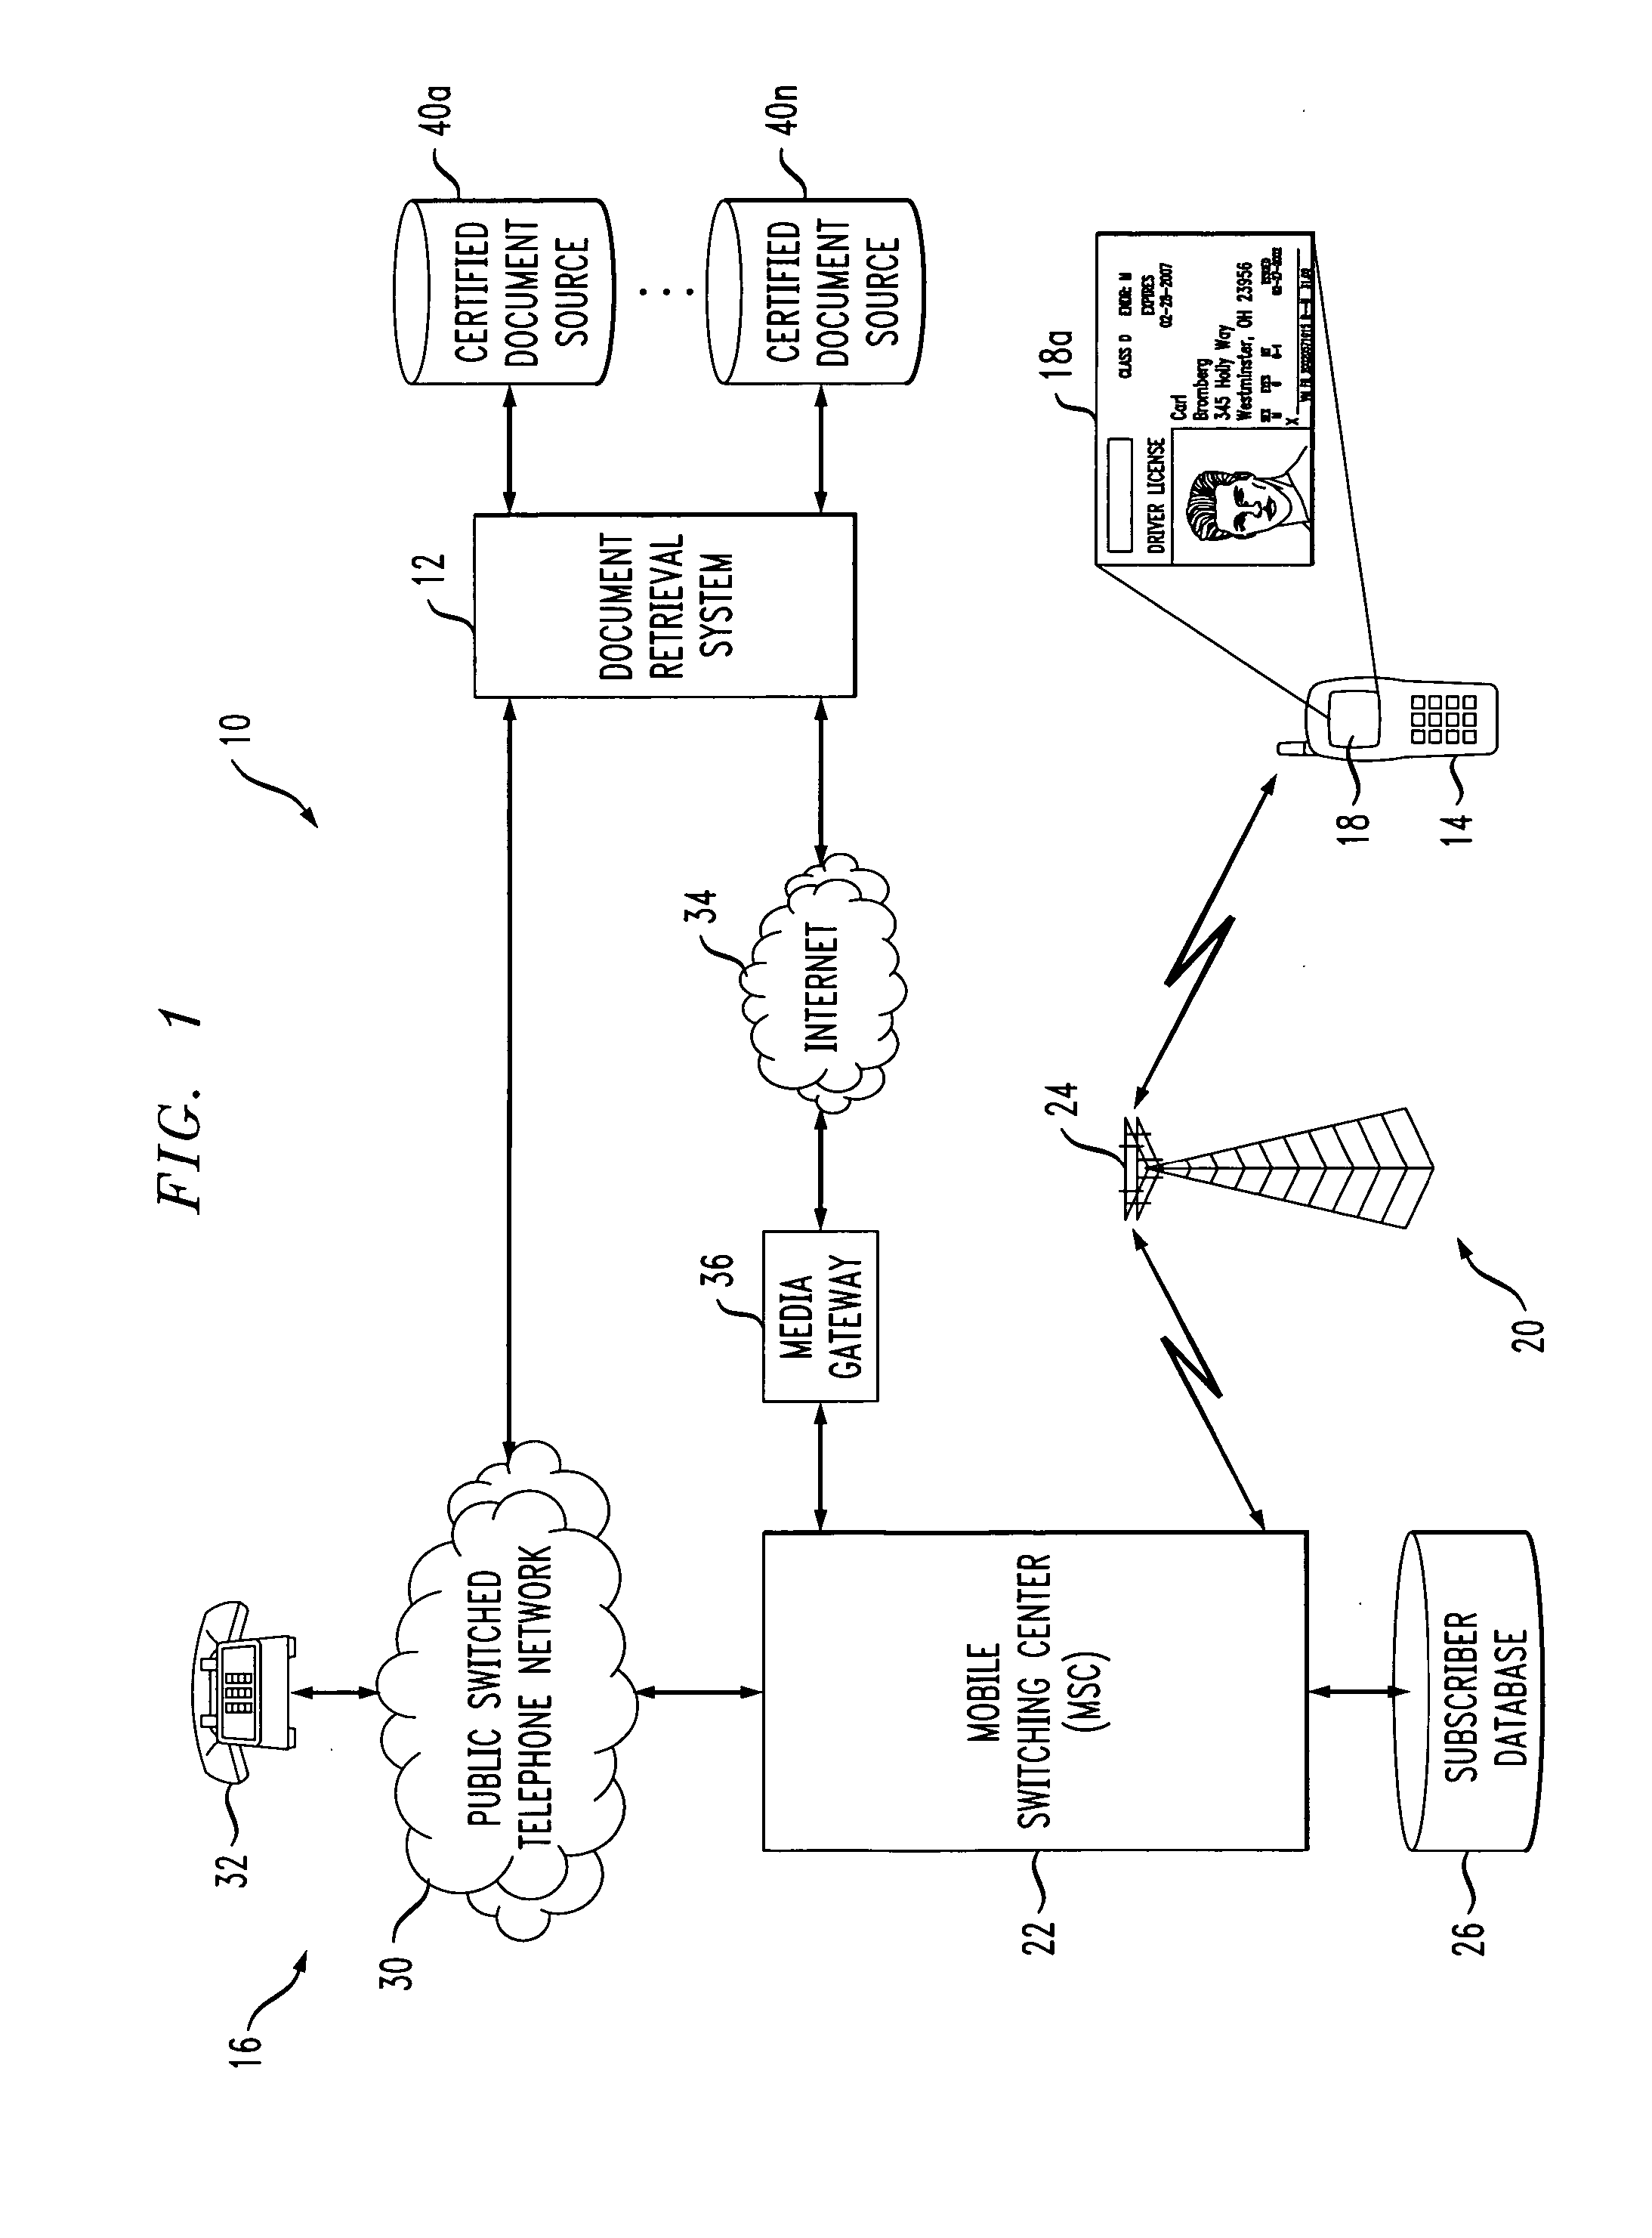 System and method of providing certified document retrieval